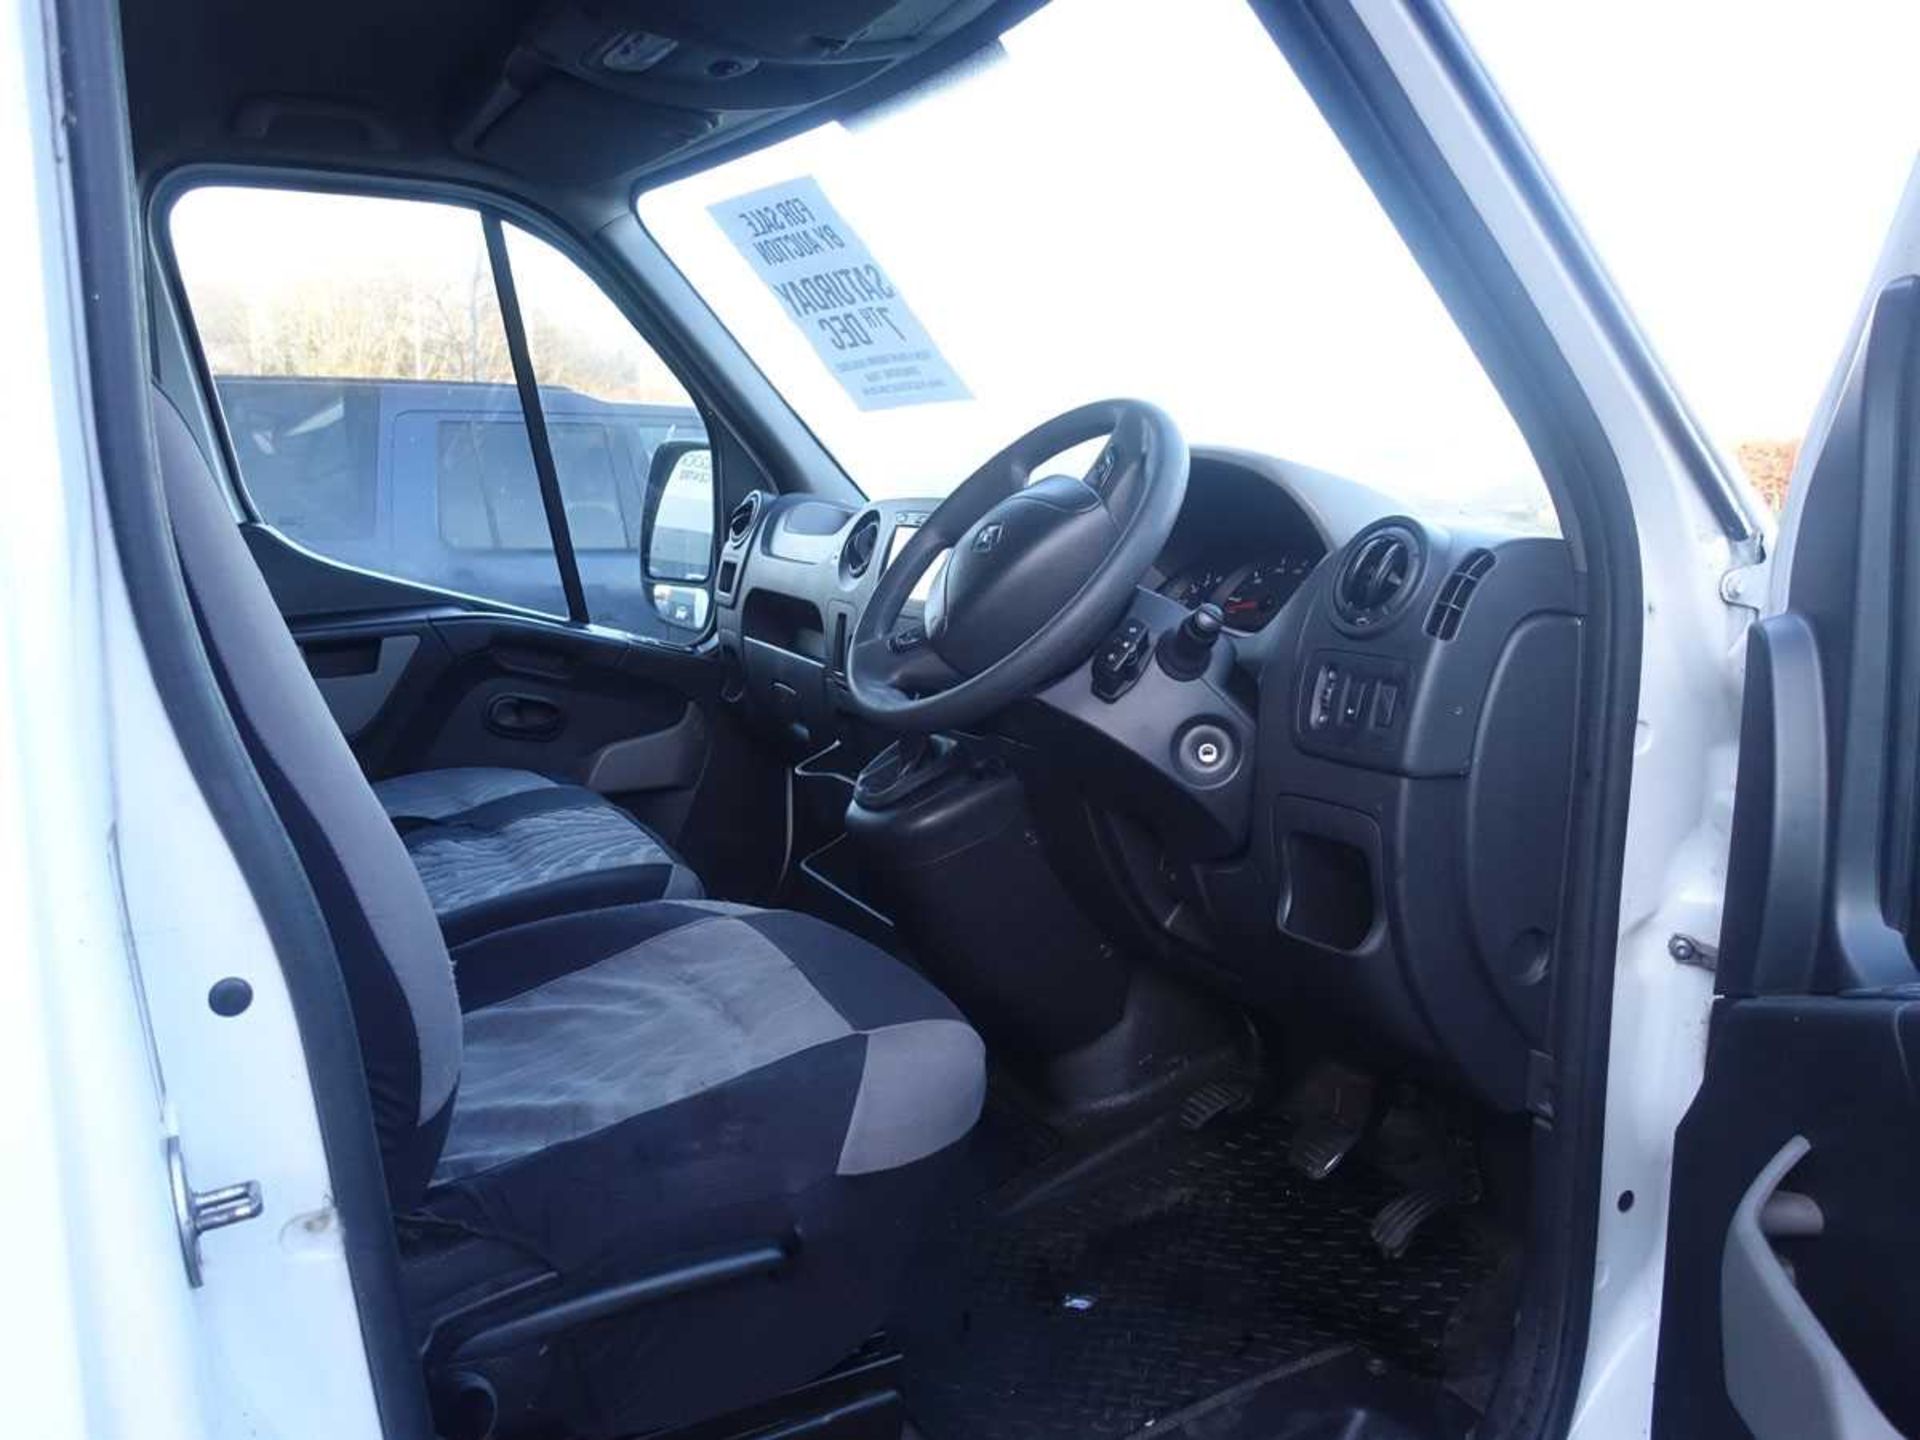 (LJ18 DBY) Renault Master ML35 B-NESS Energy DCi Luton Van in white, 6 speed manual, first - Image 4 of 9